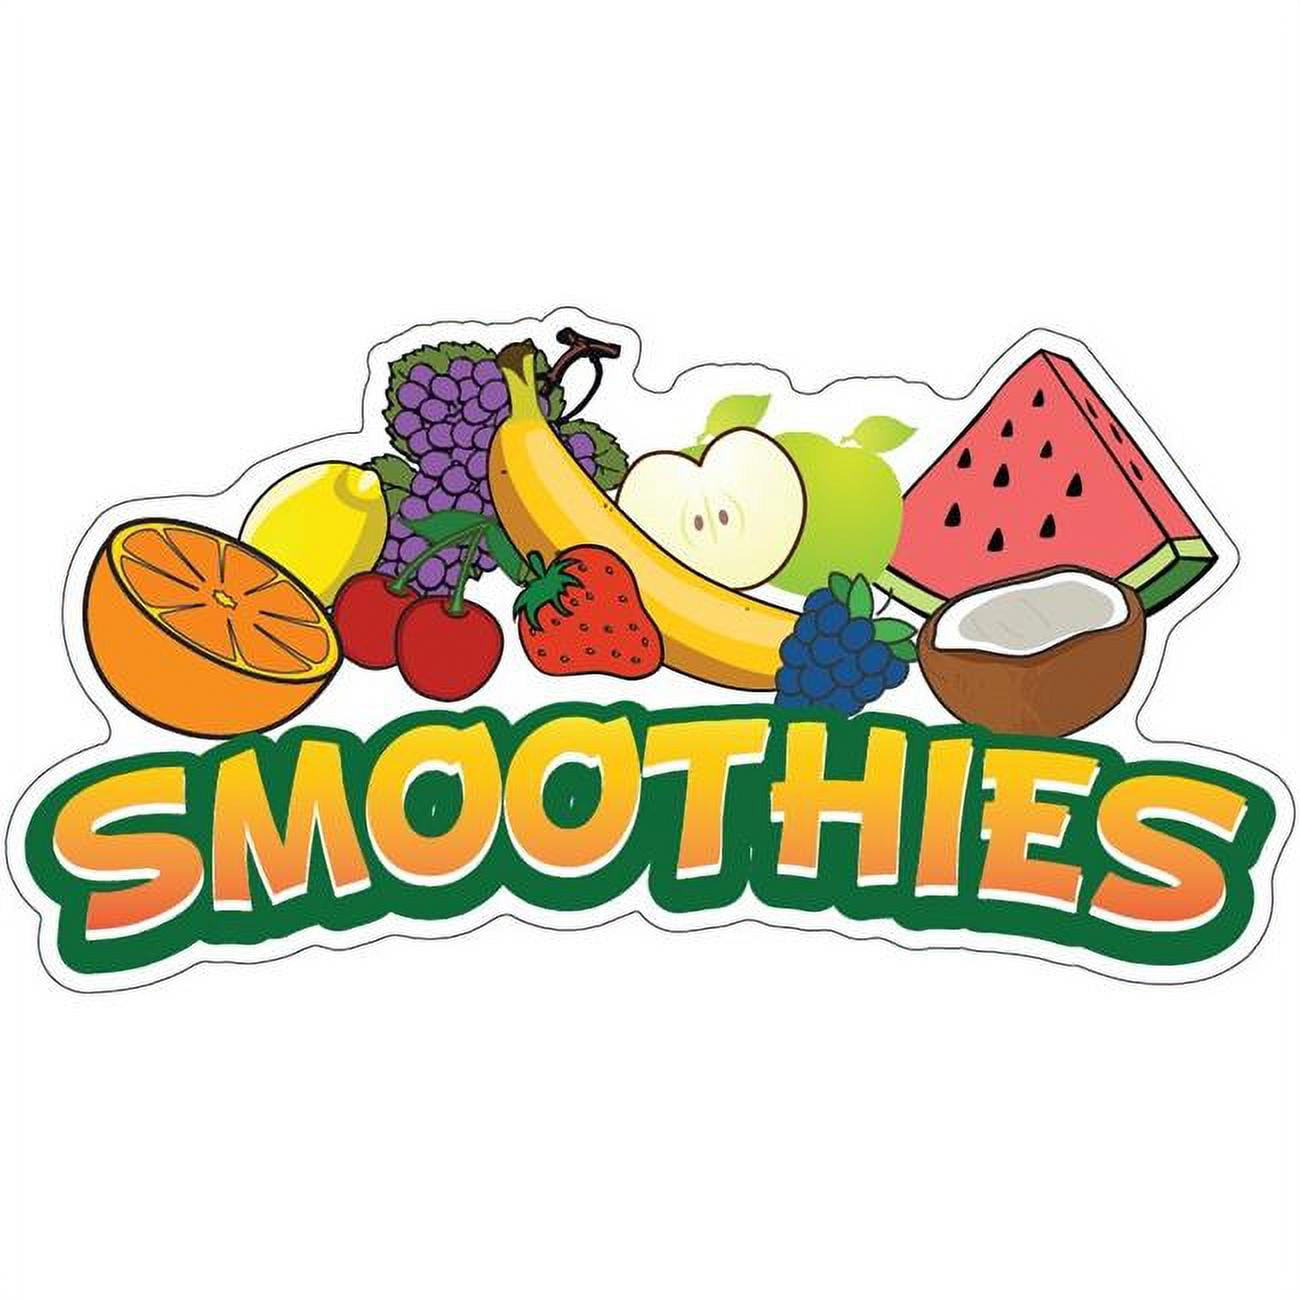 CHOOSE SIZE Concession Food Truck Vinyl Signs Sticker Fruit Smoothies DECAL 